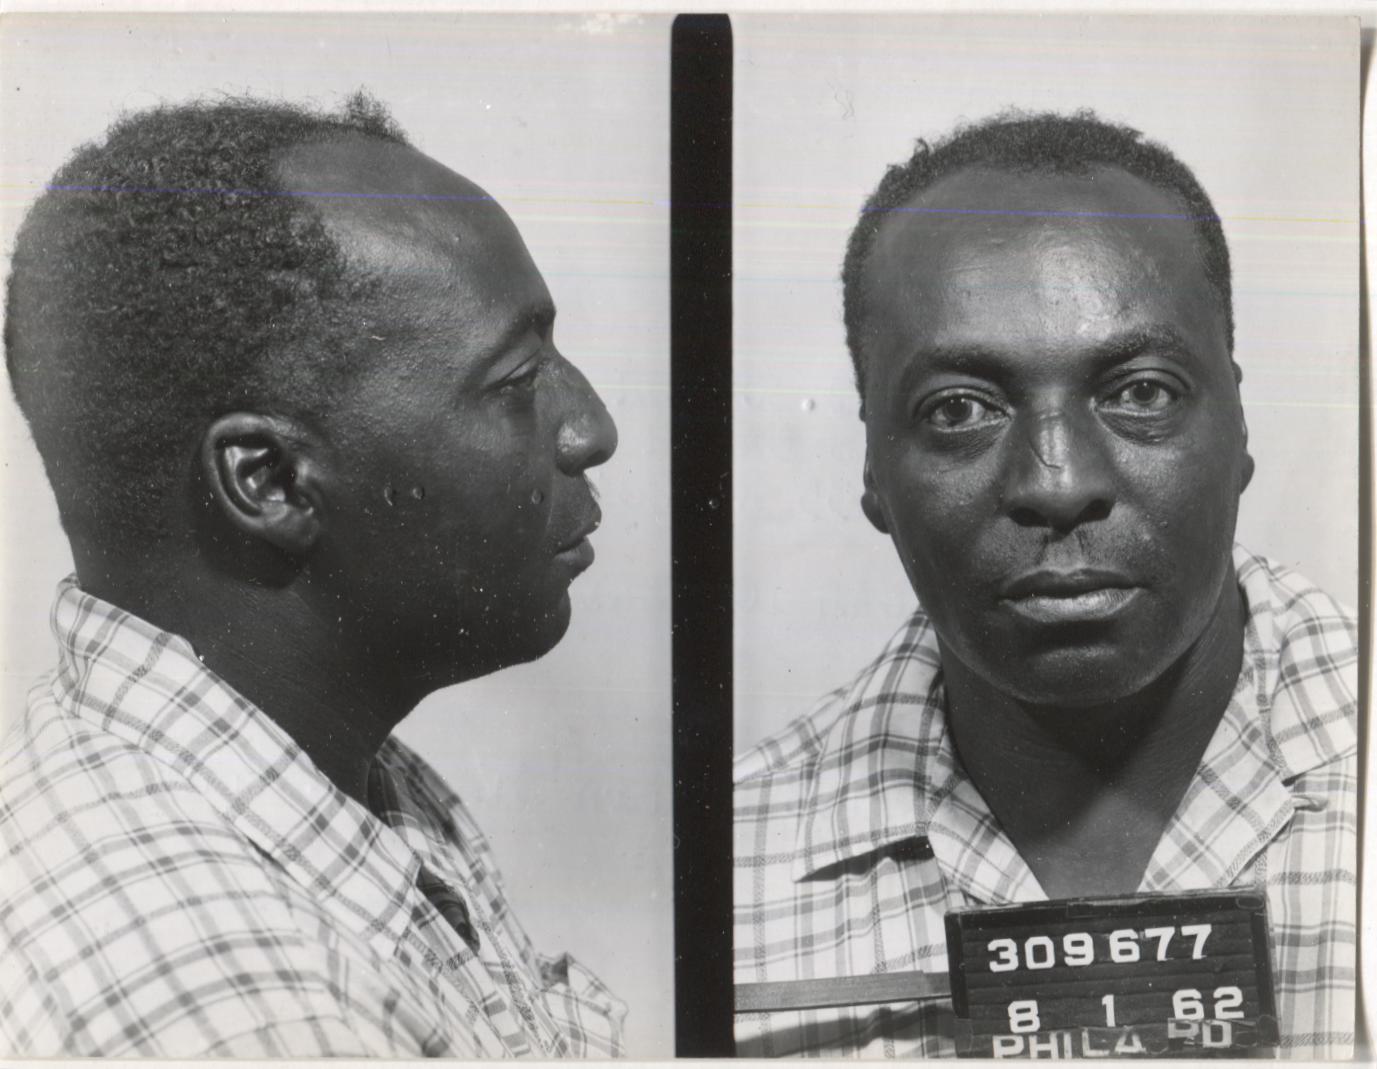 James T. Gager Mugshot - Arrested on 8/1/1962 for Illegal Lottery